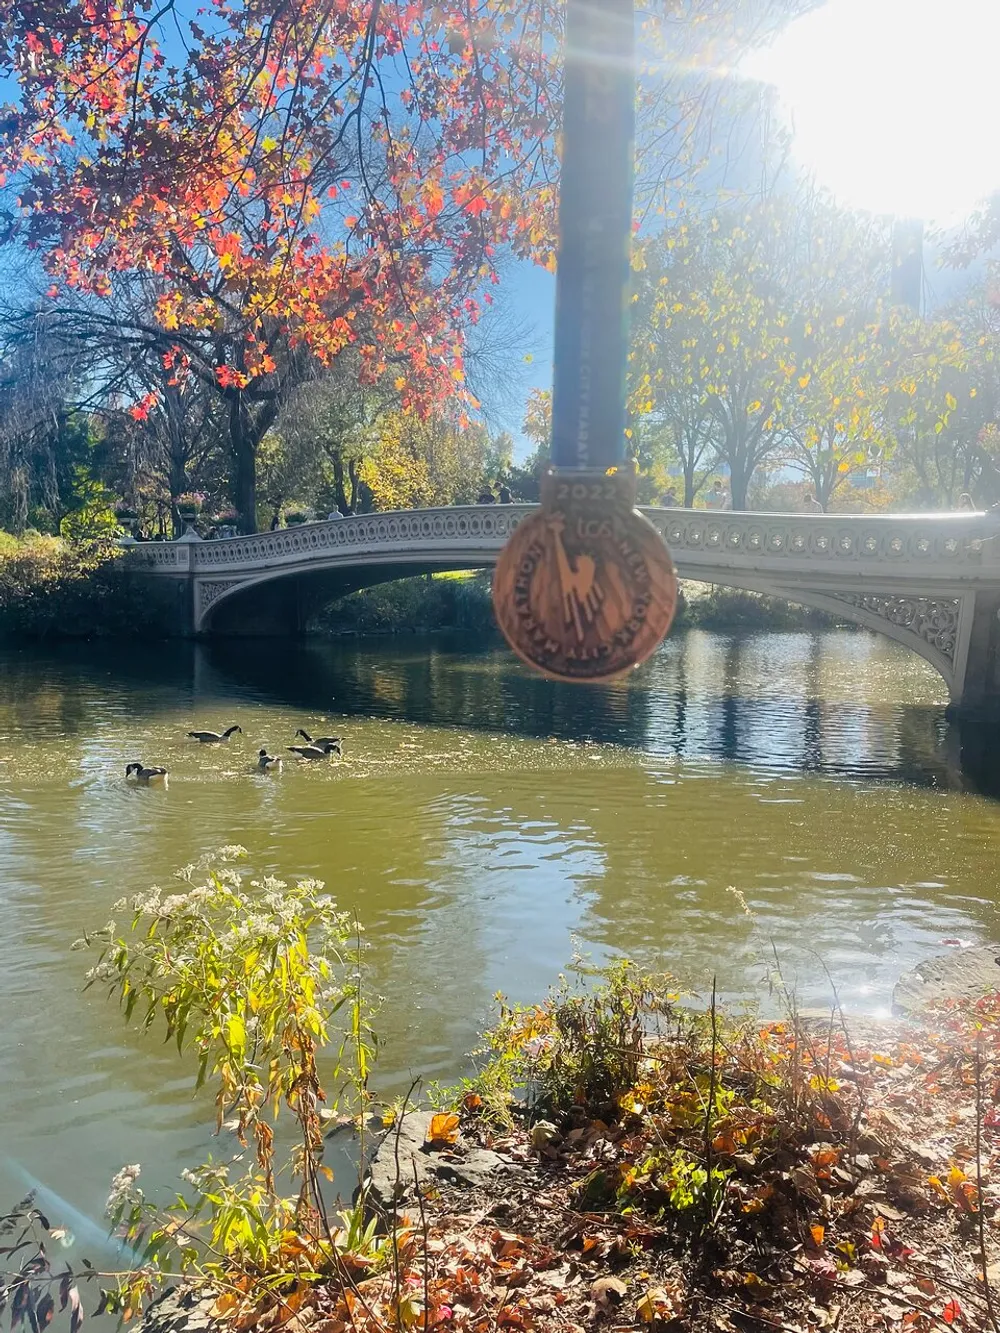 The image captures a scenic autumnal view of a bridge over water with ducks swimming vibrant fall foliage and a medal hanging in the foreground creating a sense of achievement in a picturesque setting